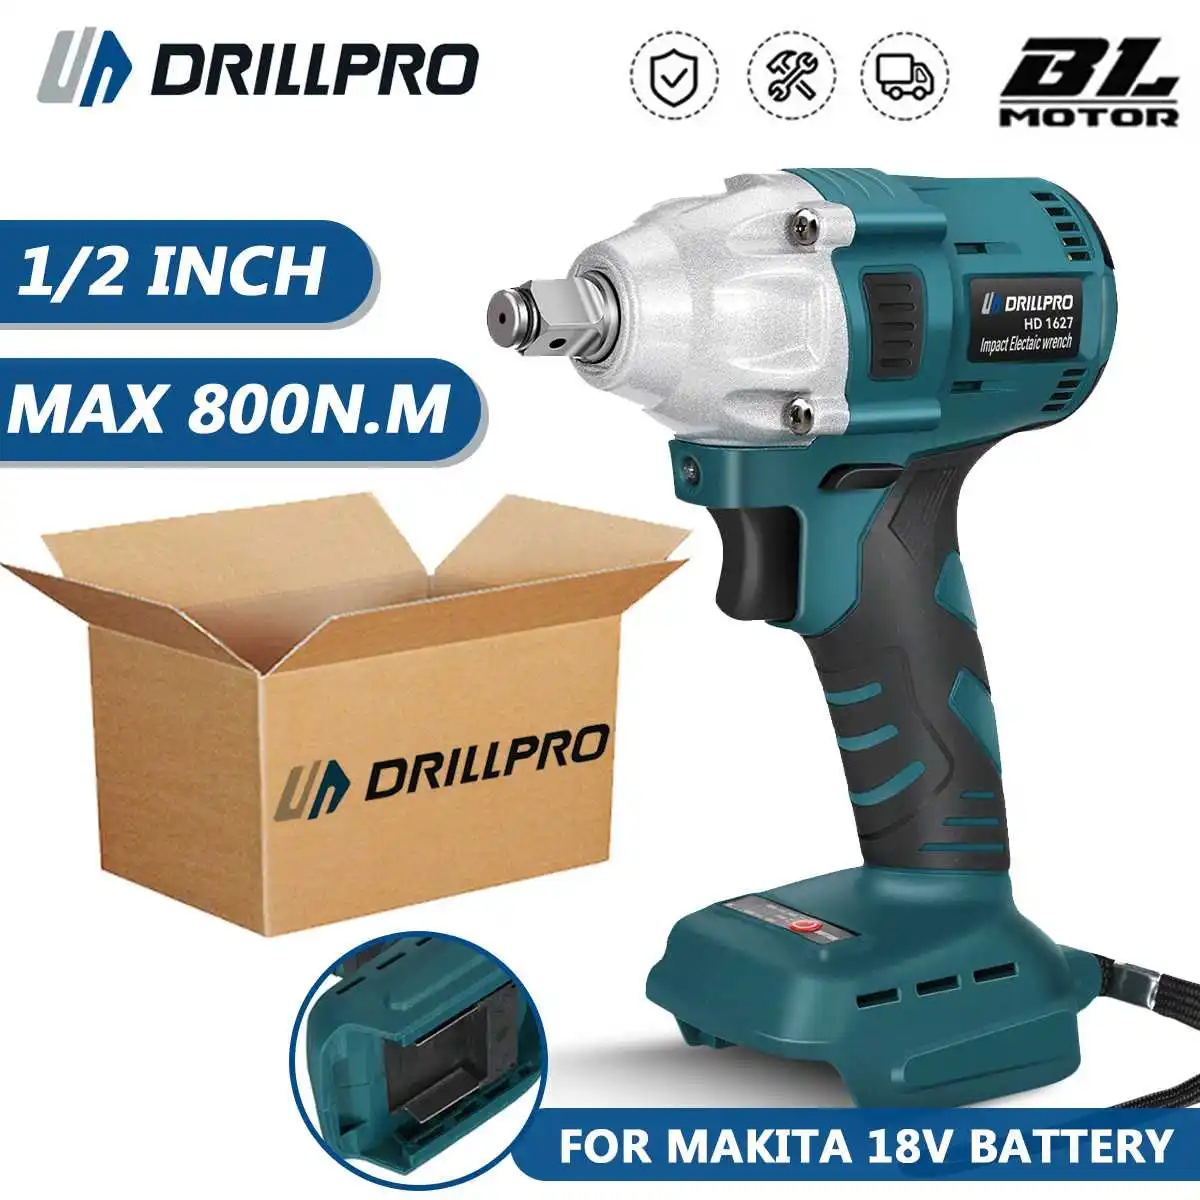 

Drillpro 800N.M Brushless Impact Electric Wrench Cordless 2700RPM 3000W 1/2 inch Power Repair Tools For Makita 18V Battery New